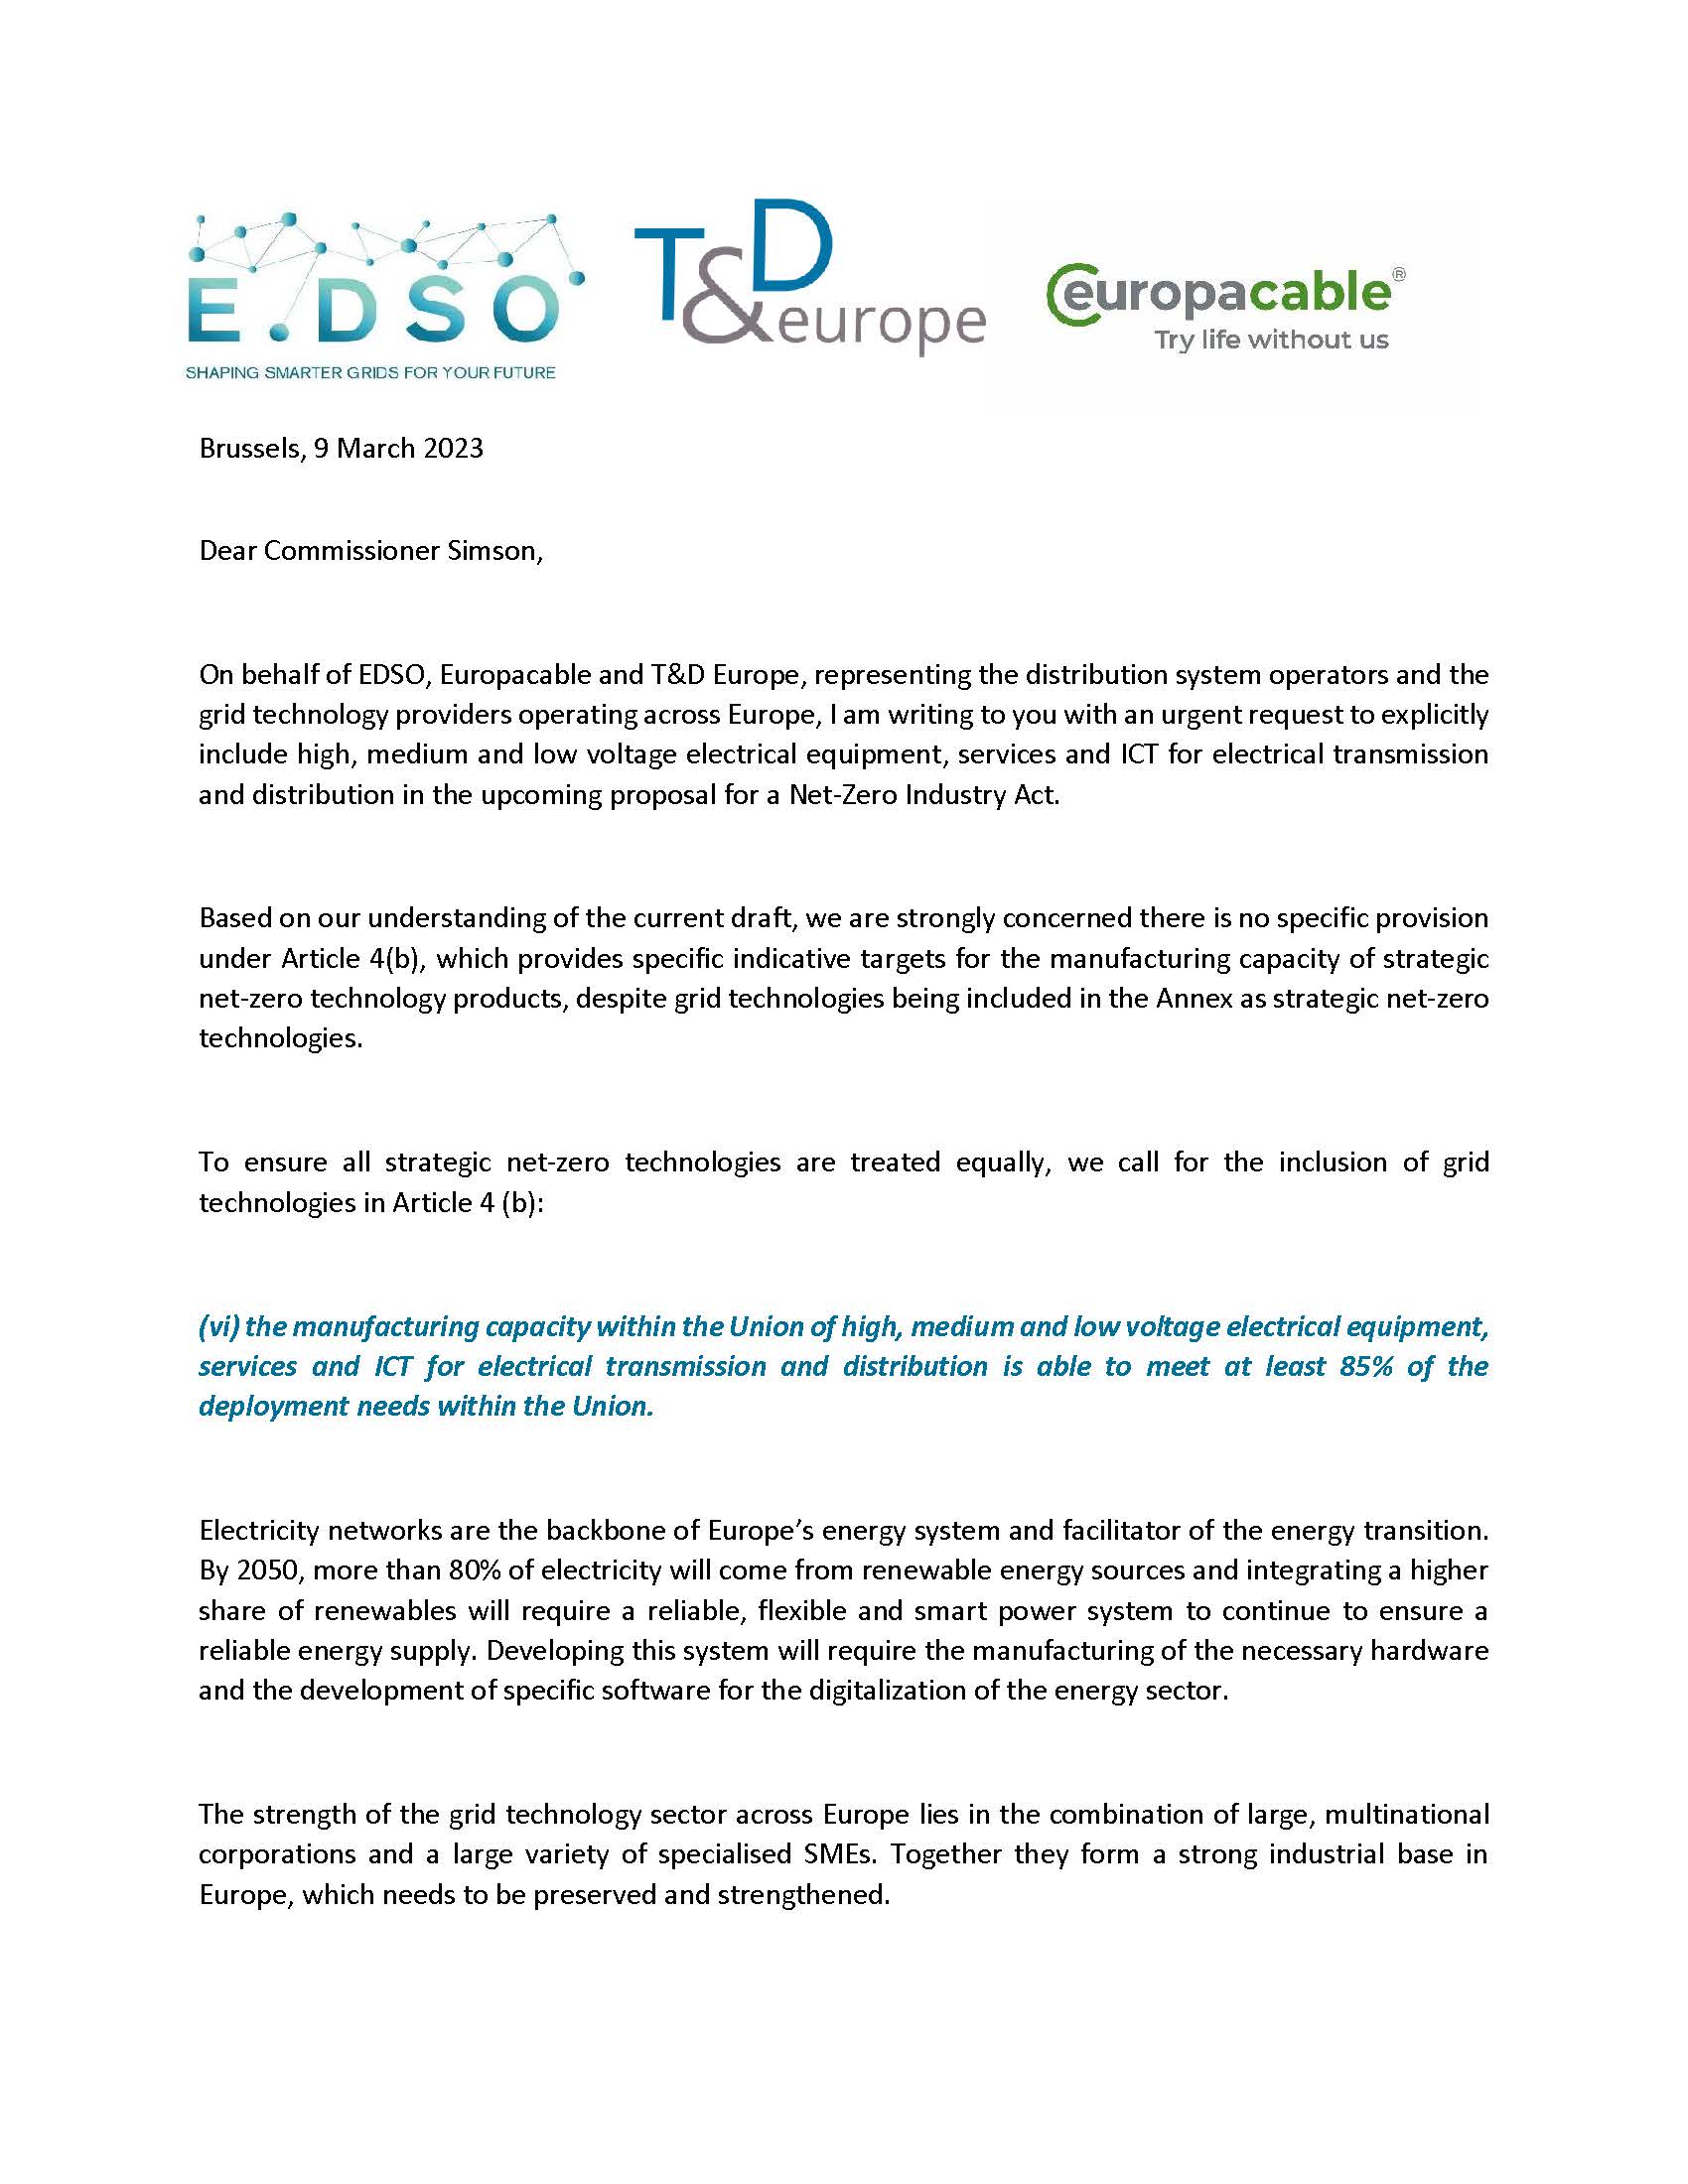 Net- Zero Industry Act. E.DSO/Europacable /T&D Europe Urgent request to explicitly include grid technologies